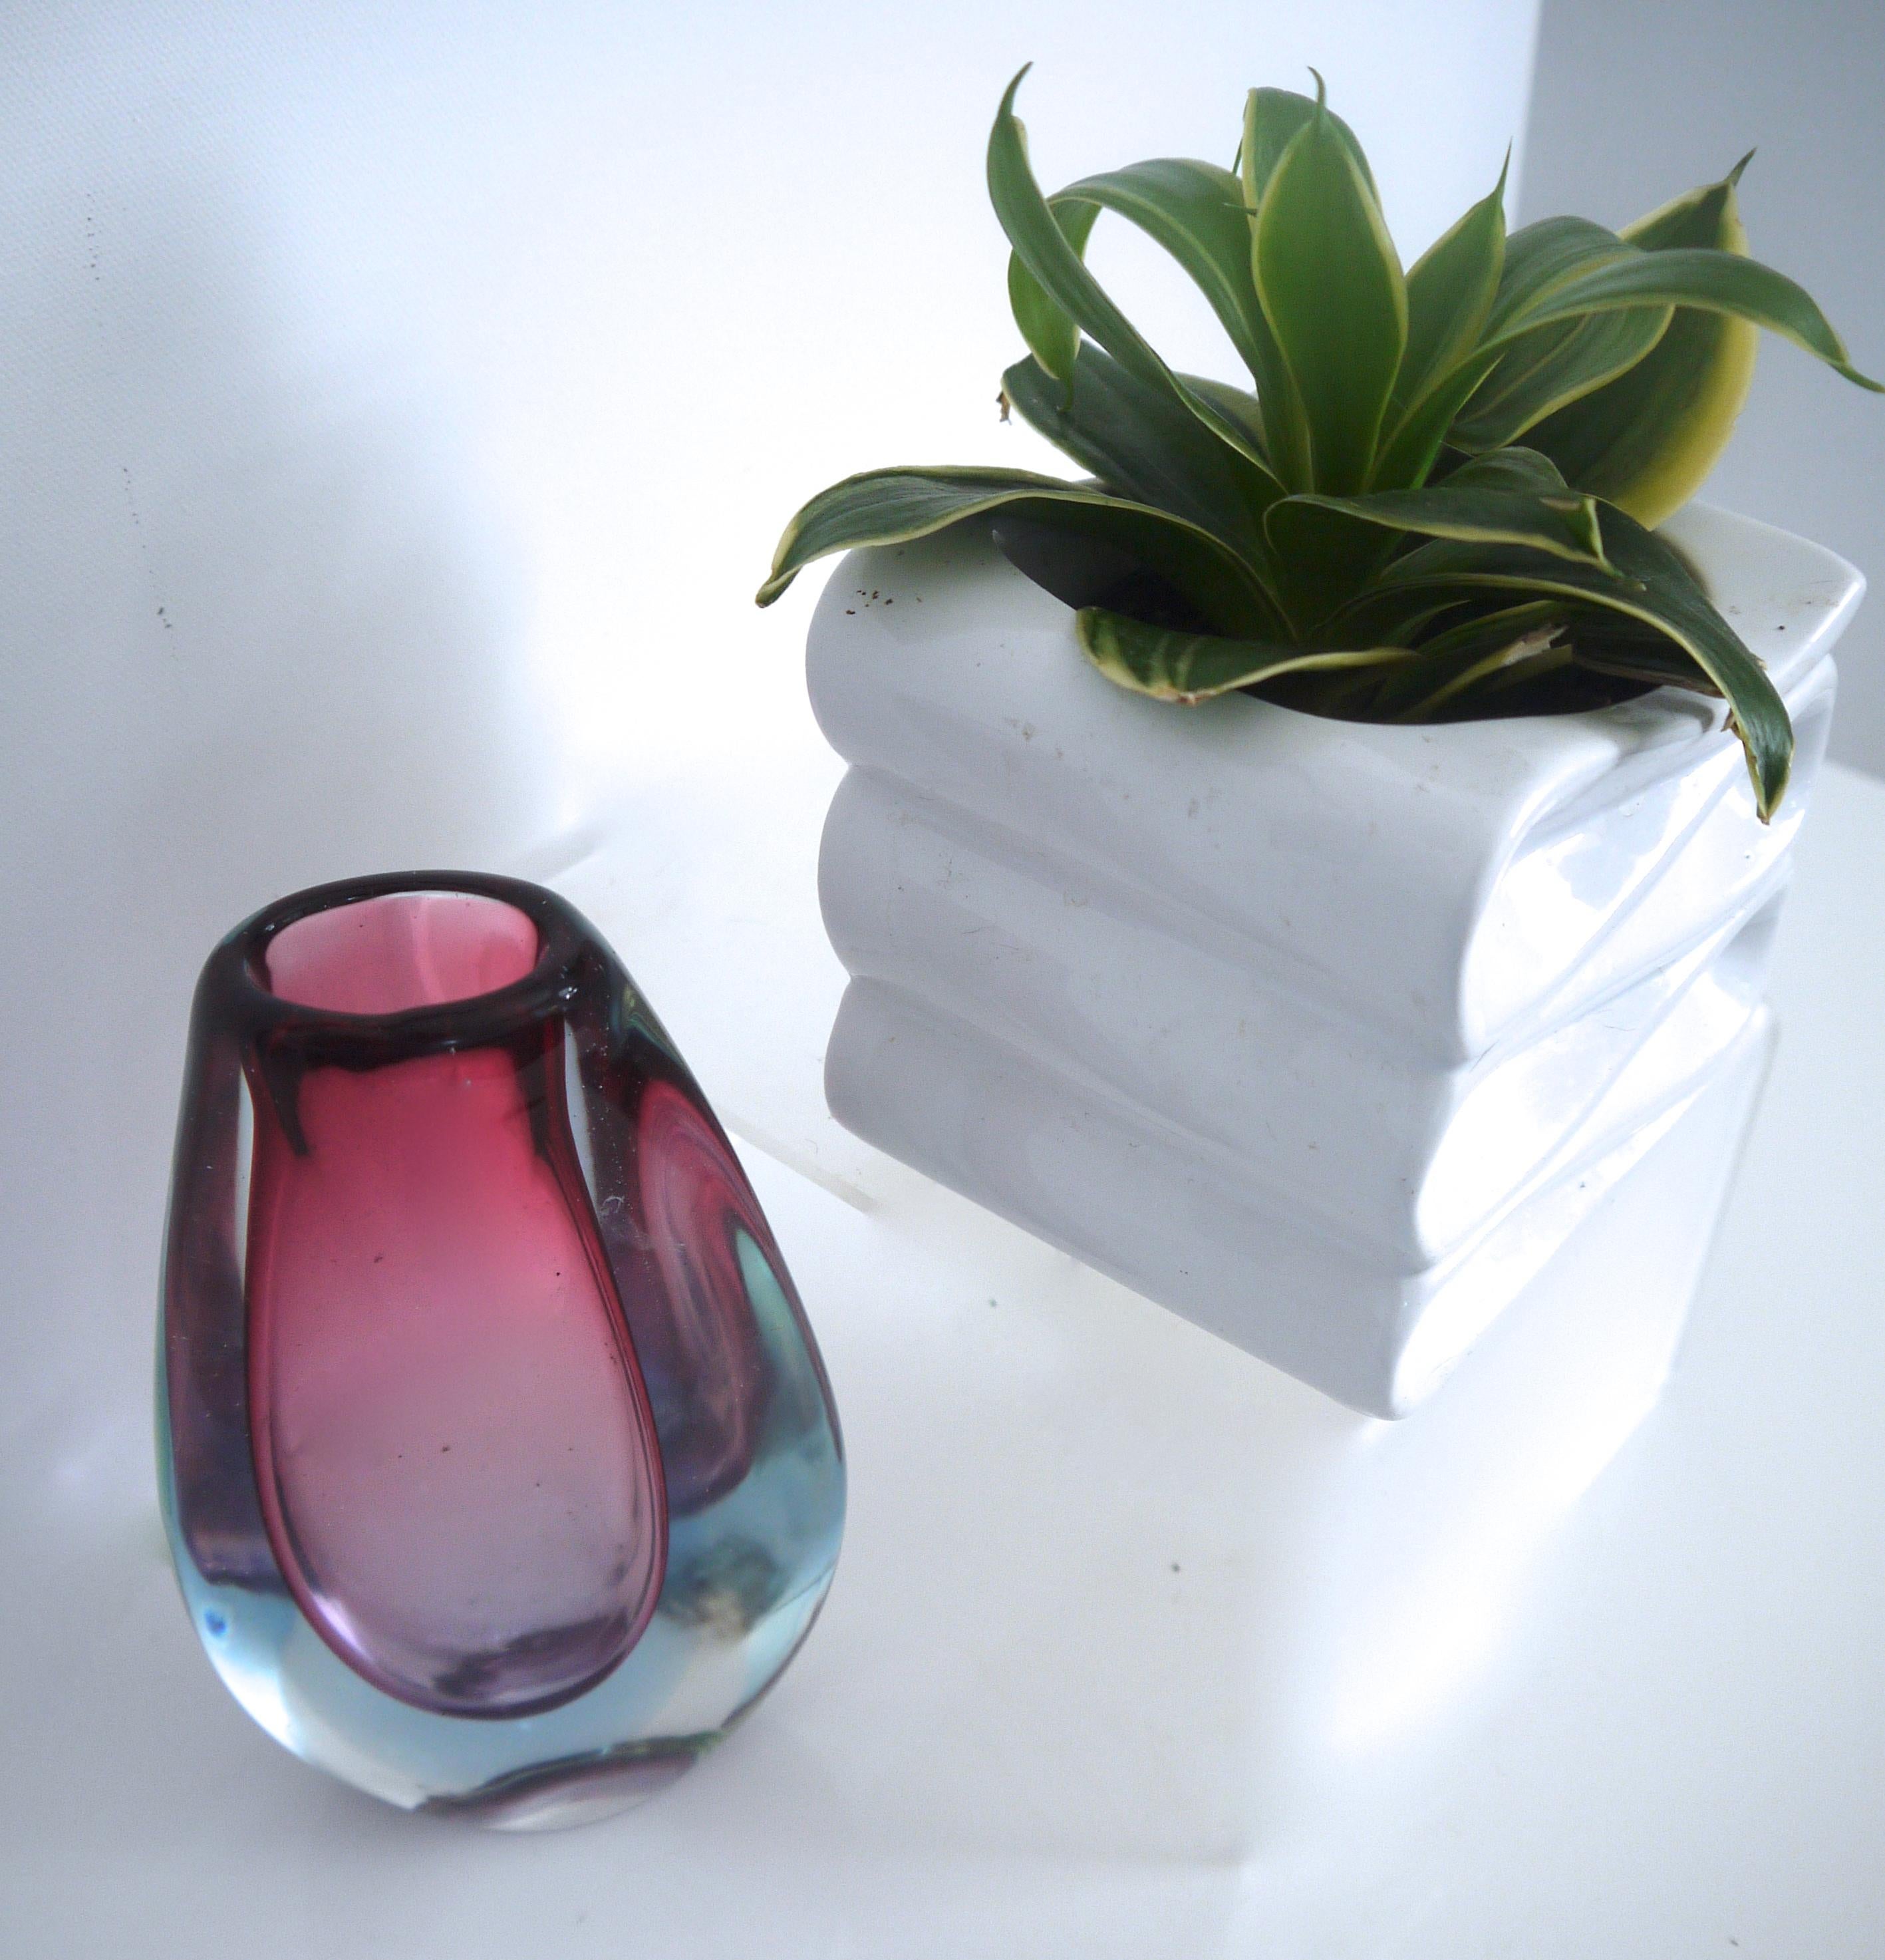 Murano Sommerso teardrop vintage art glass vase late 1960s-1970s blues and pink


Sommerso glass is often are attributed to Seguso Vetri d'Arte it can however, be attributed other factories in the Murano region which have made pieces in this